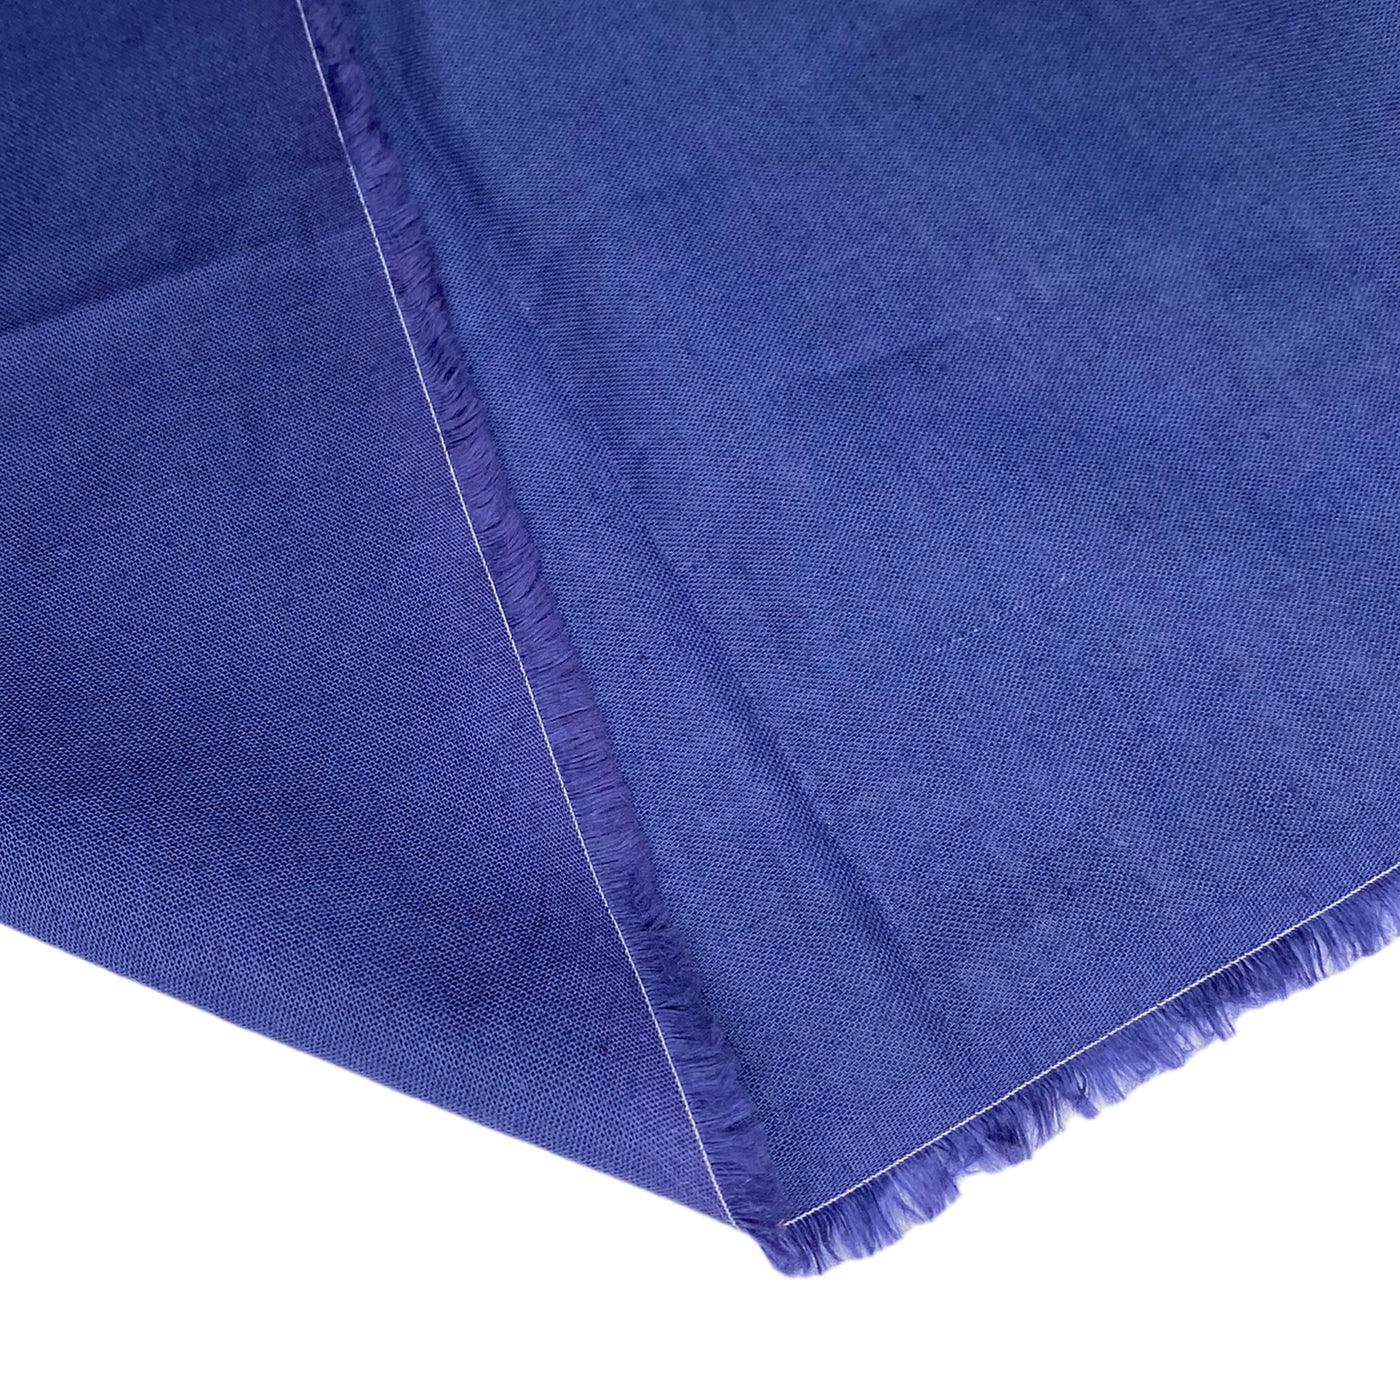 Cotton Broadcloth - Navy